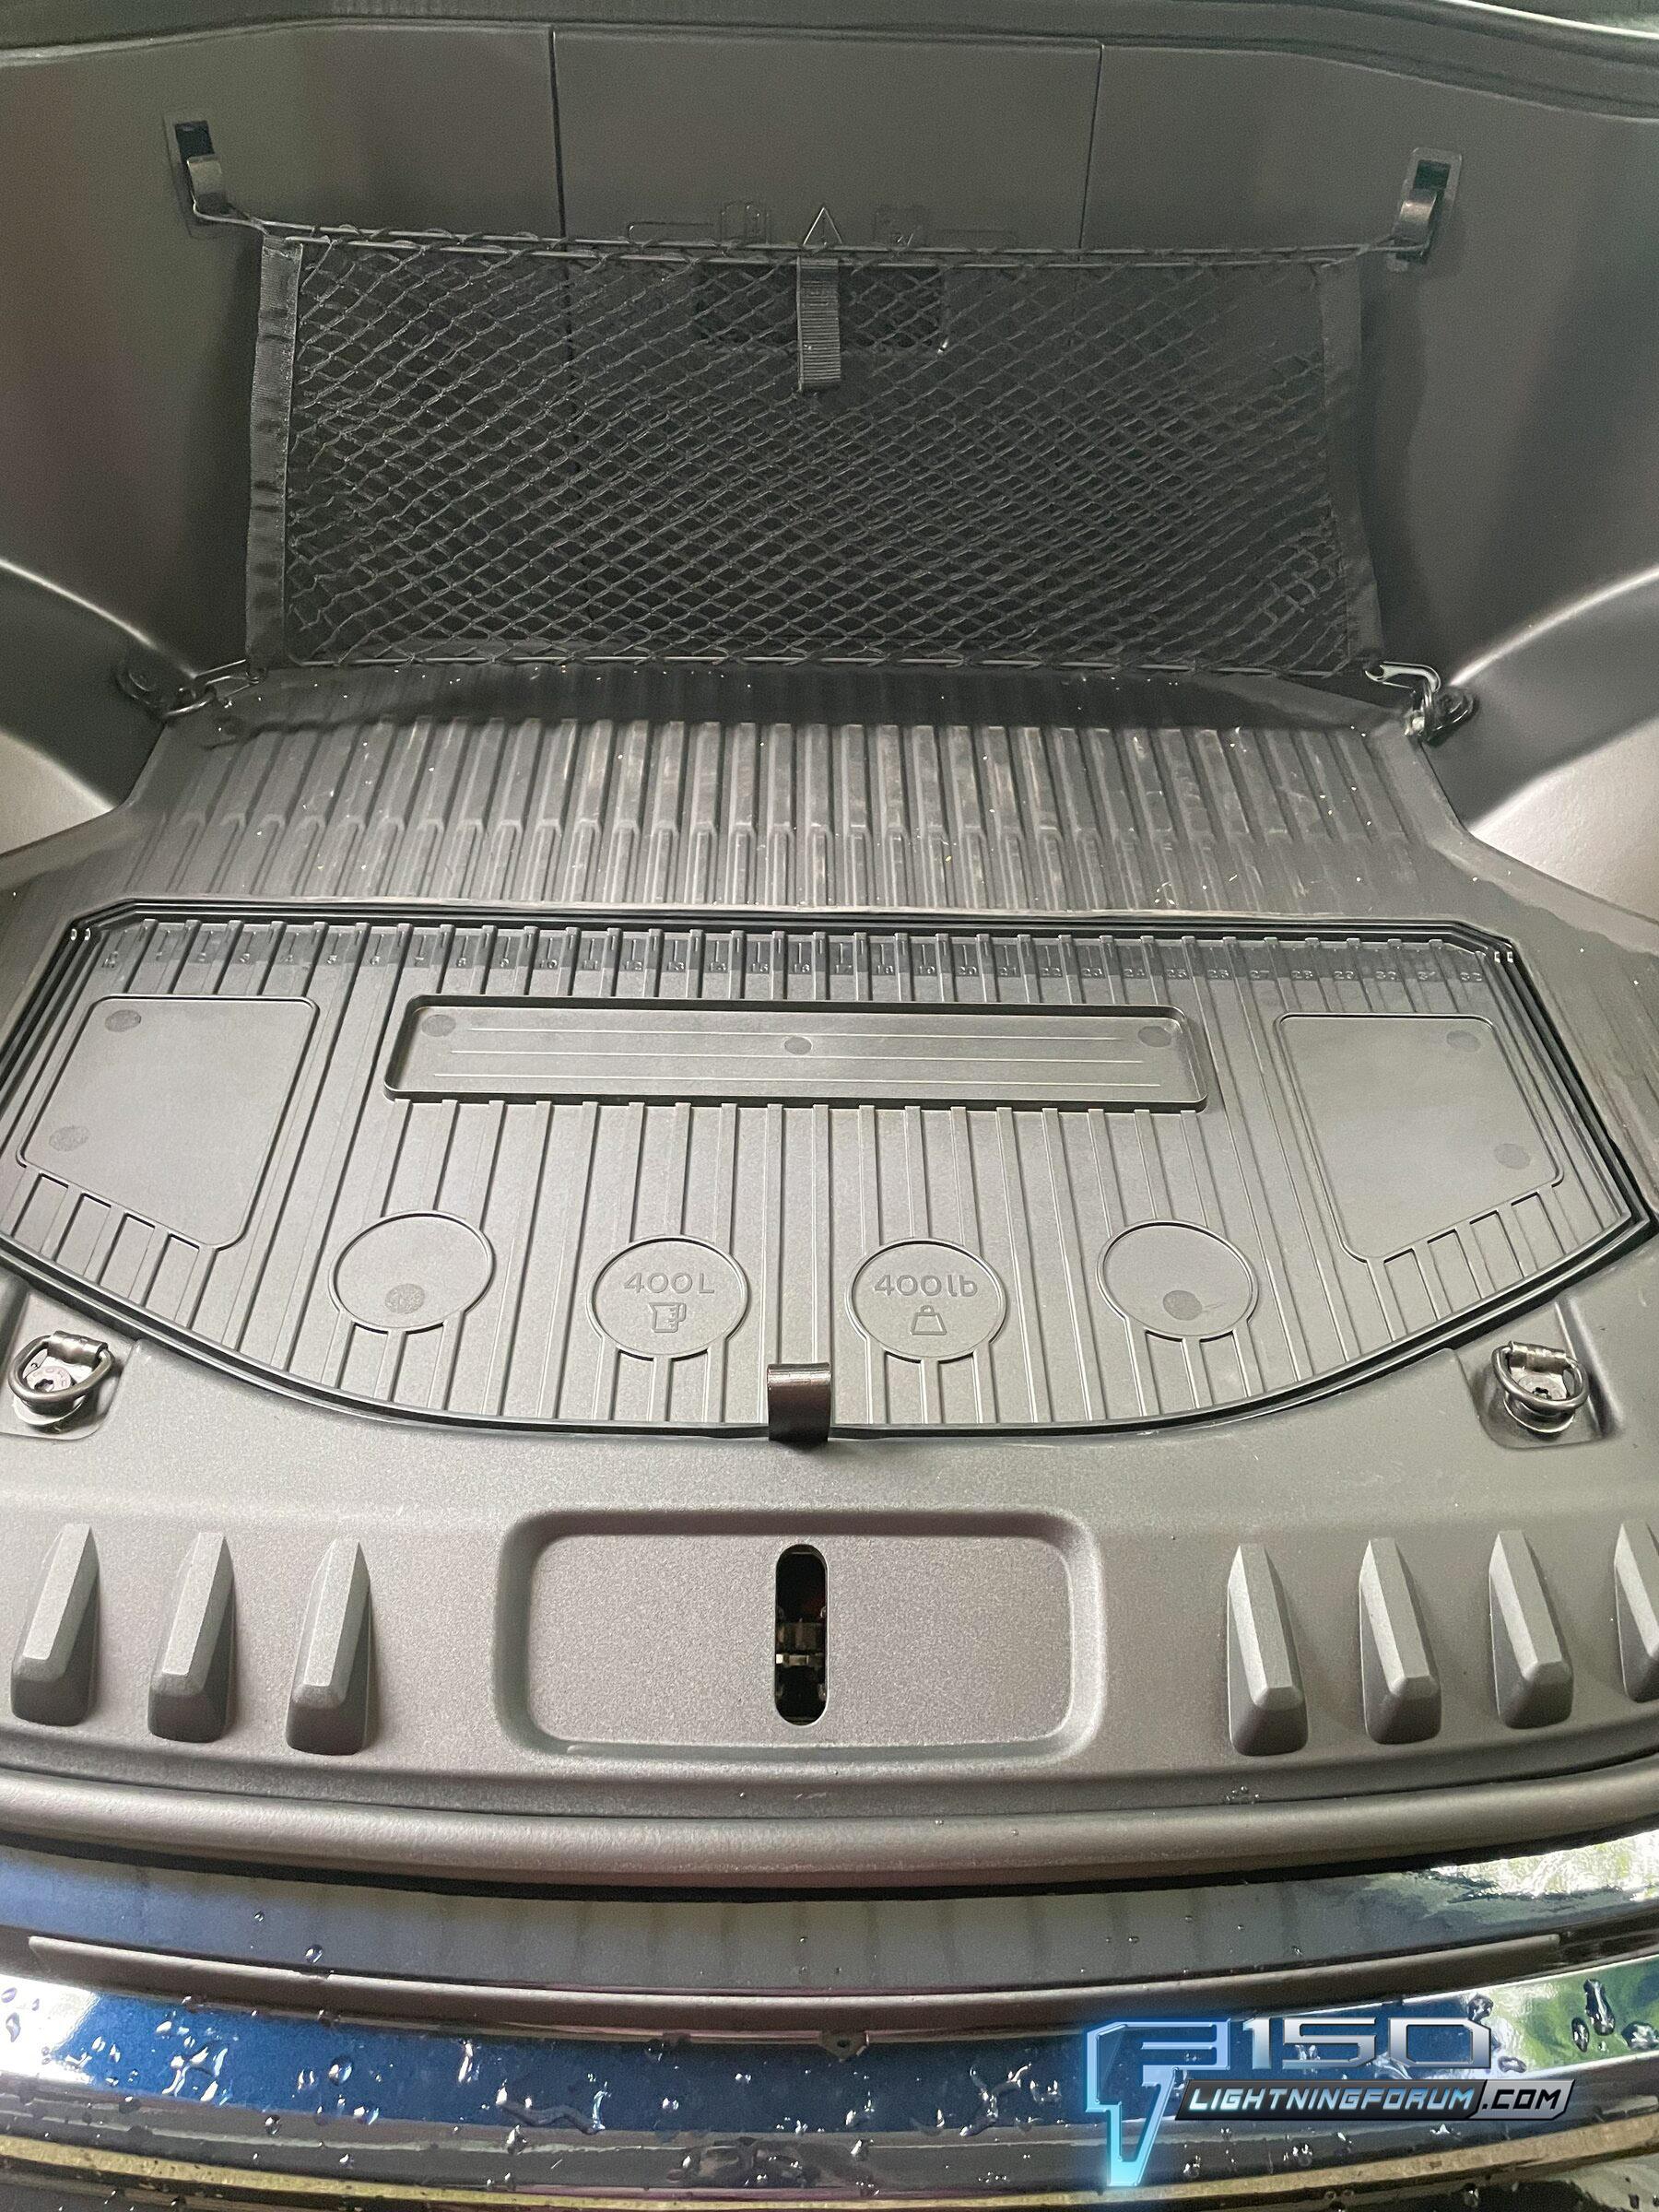 Ford F-150 Lightning What the frunk? Lightning front trunk dimensions / measurements and configurations - photos 2022 F150 Ford Lightning Frunk Front Trunk Dimensions 5